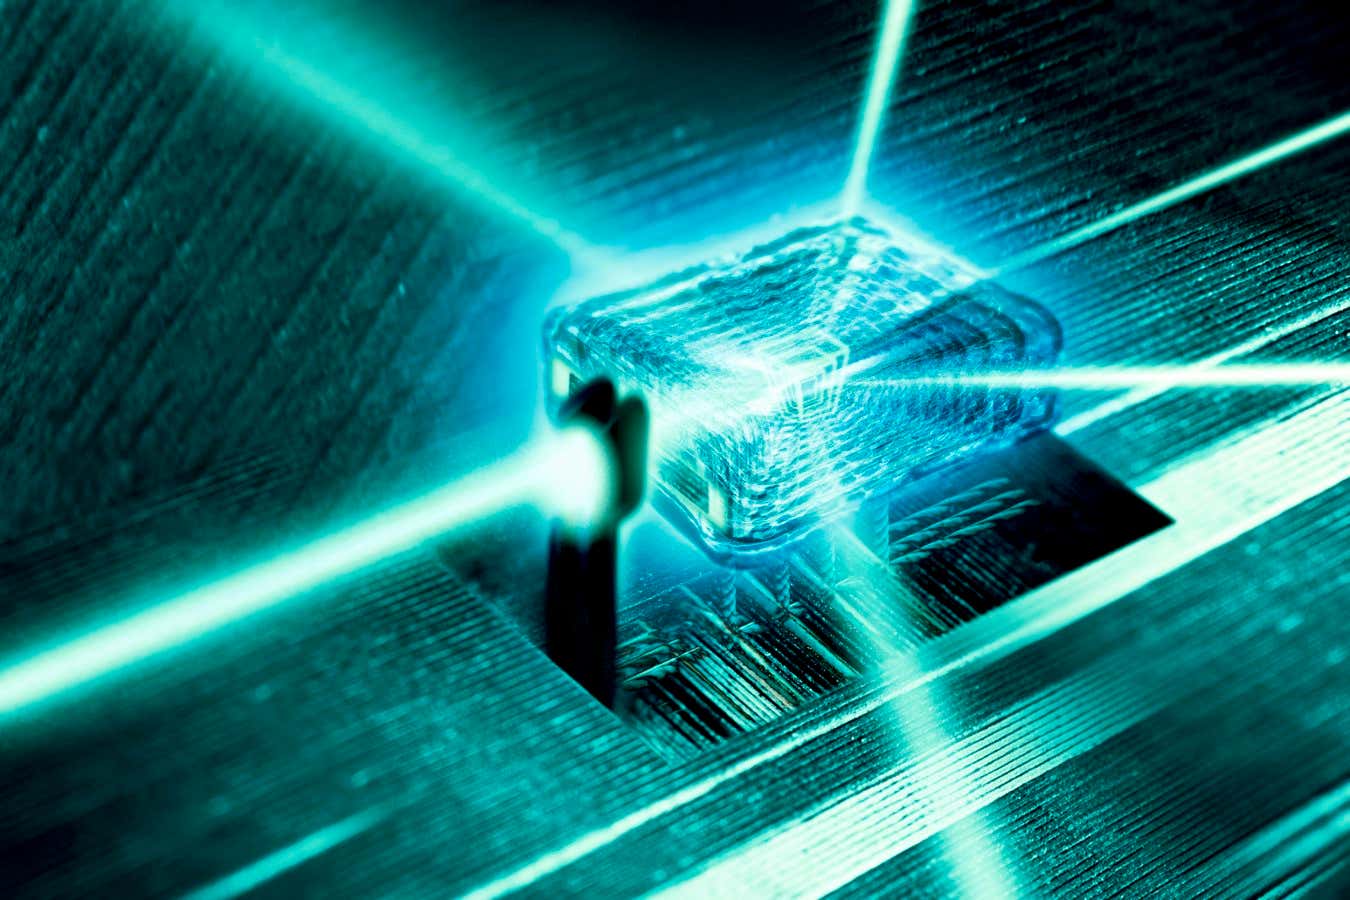 Diamond could be the super semiconductor the US power grid needs